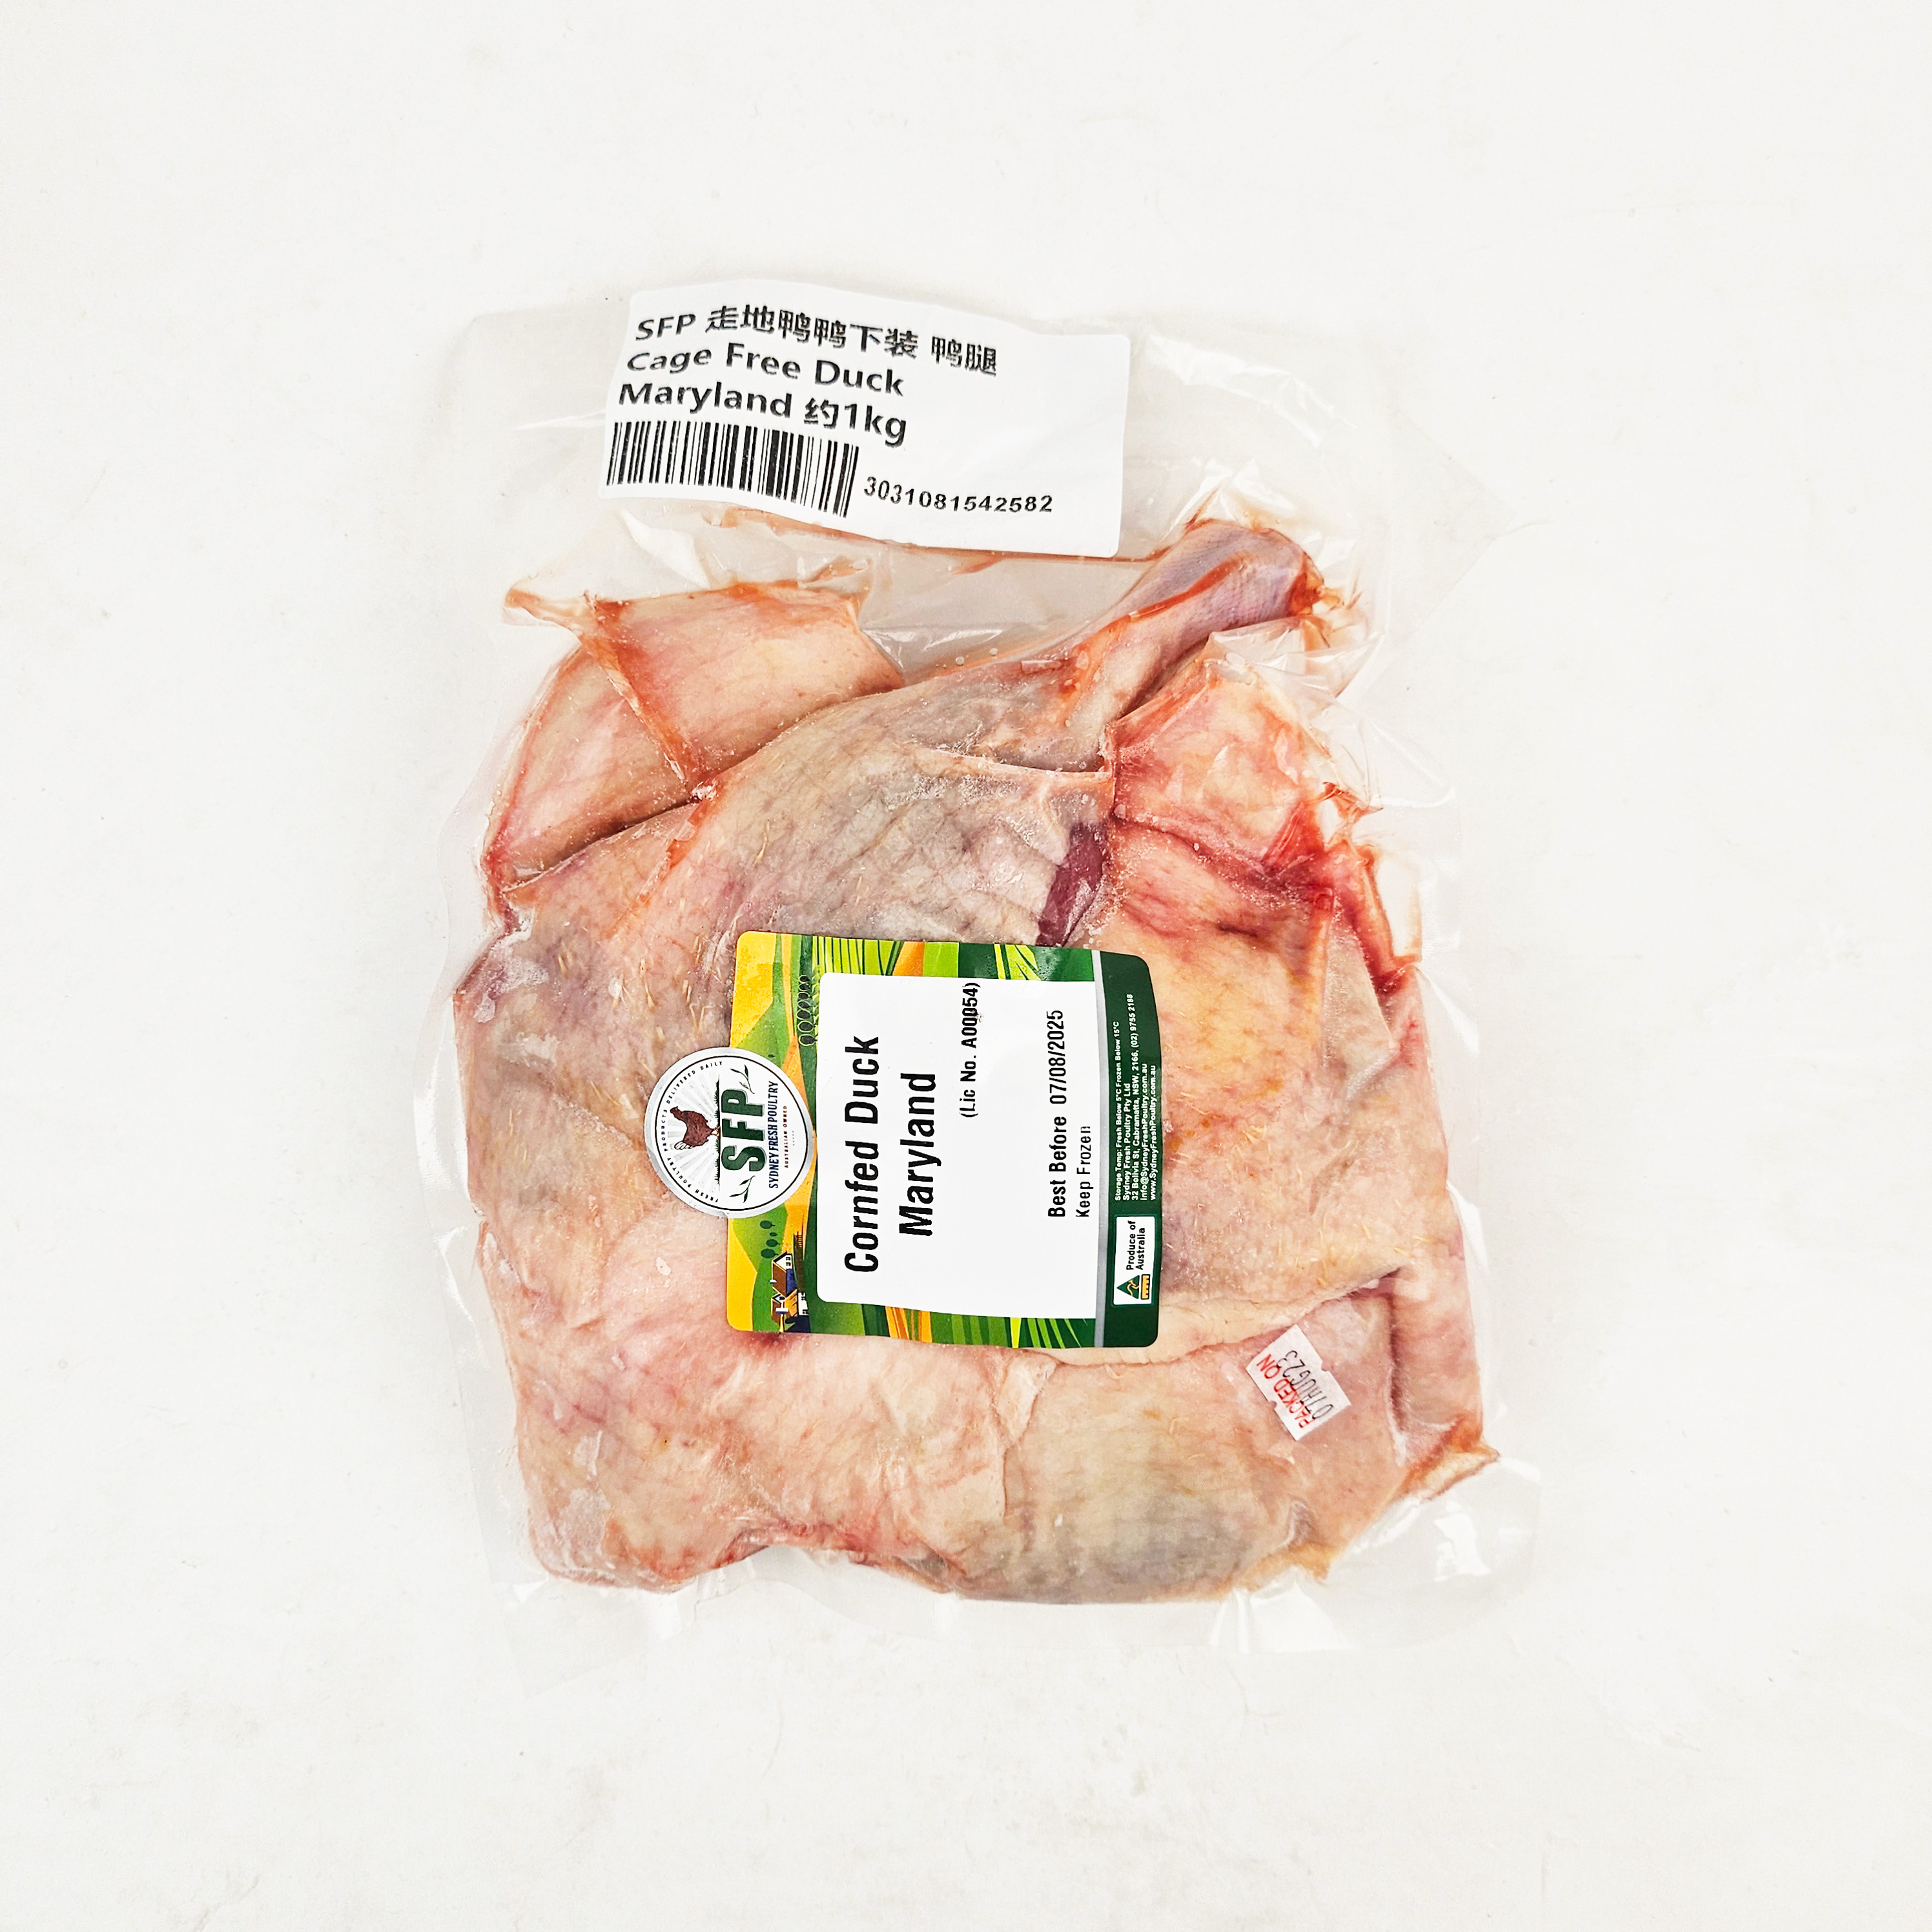 SFP Cage Free Duck Maryland Approx. 1kg-eBest-Poultry,Meat deli & eggs